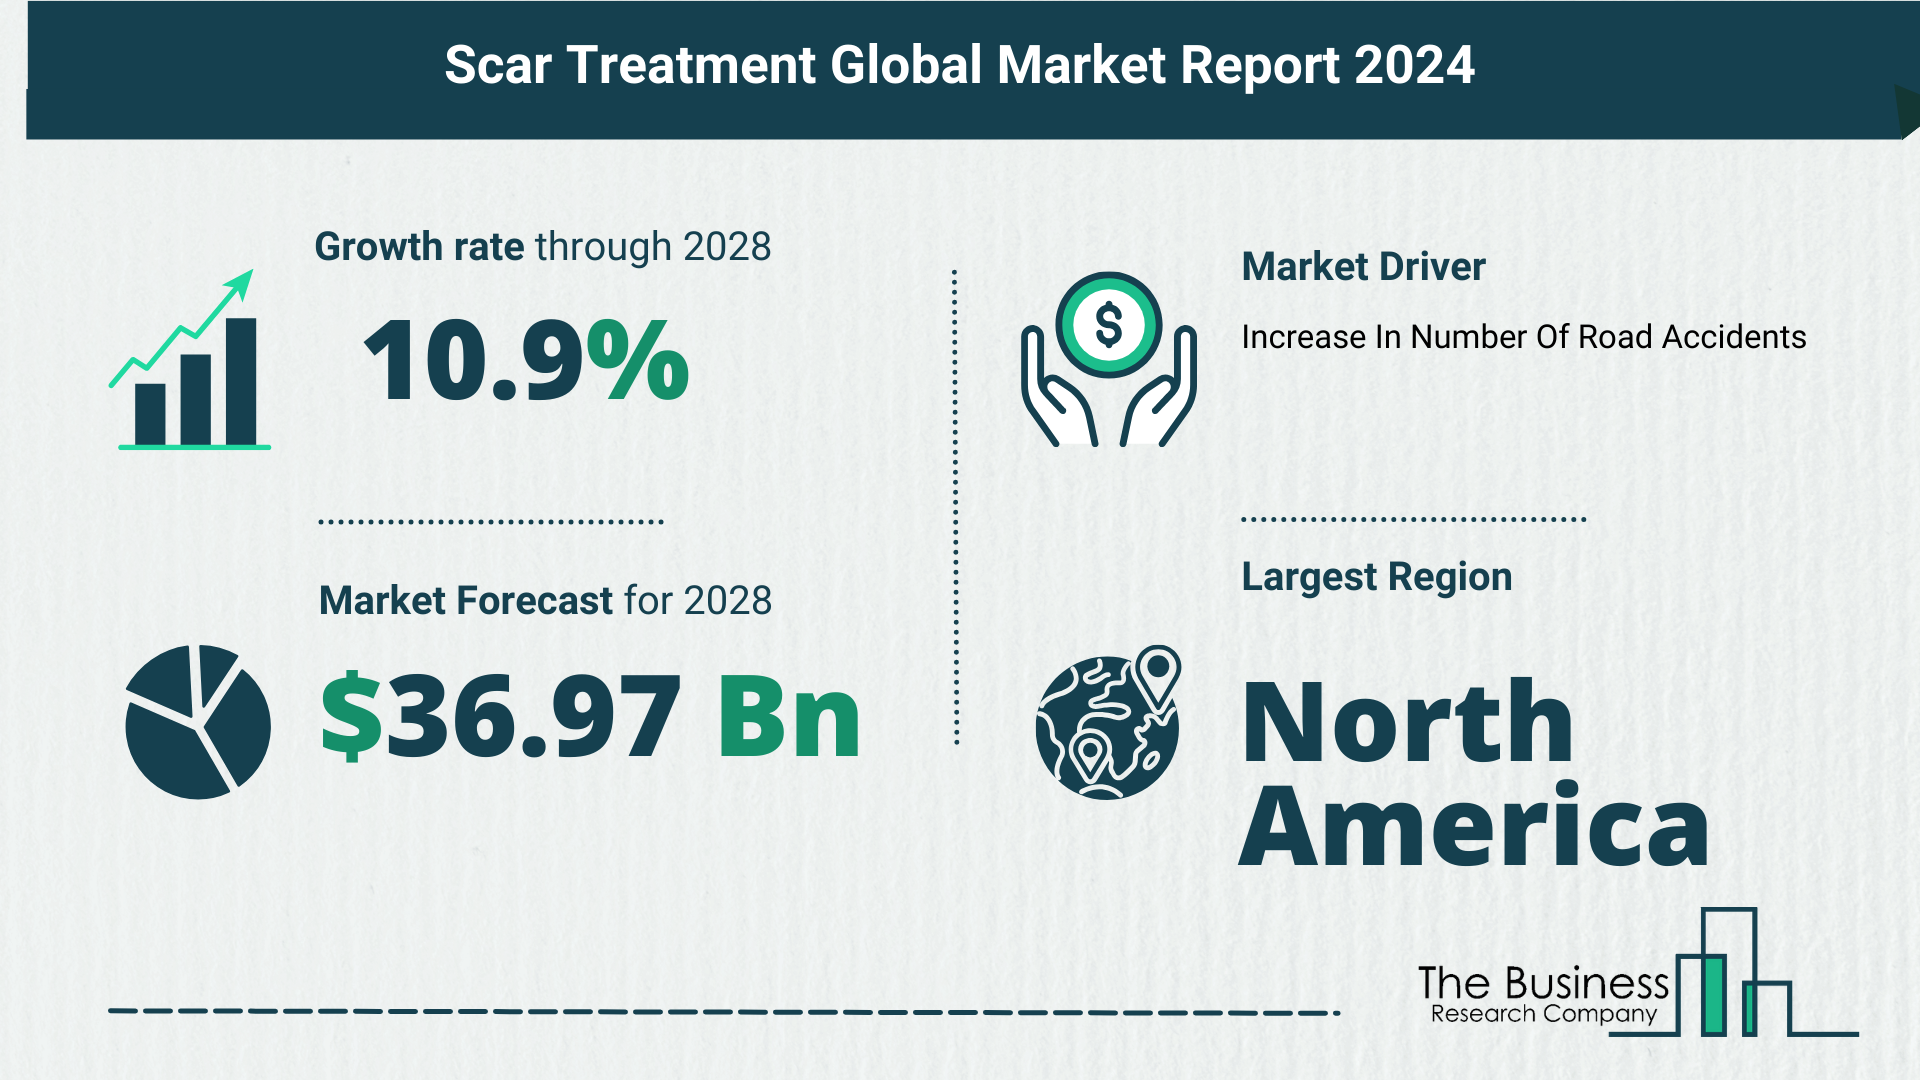 Global Scar Treatment Market Analysis: Estimated Market Size And Growth Rate